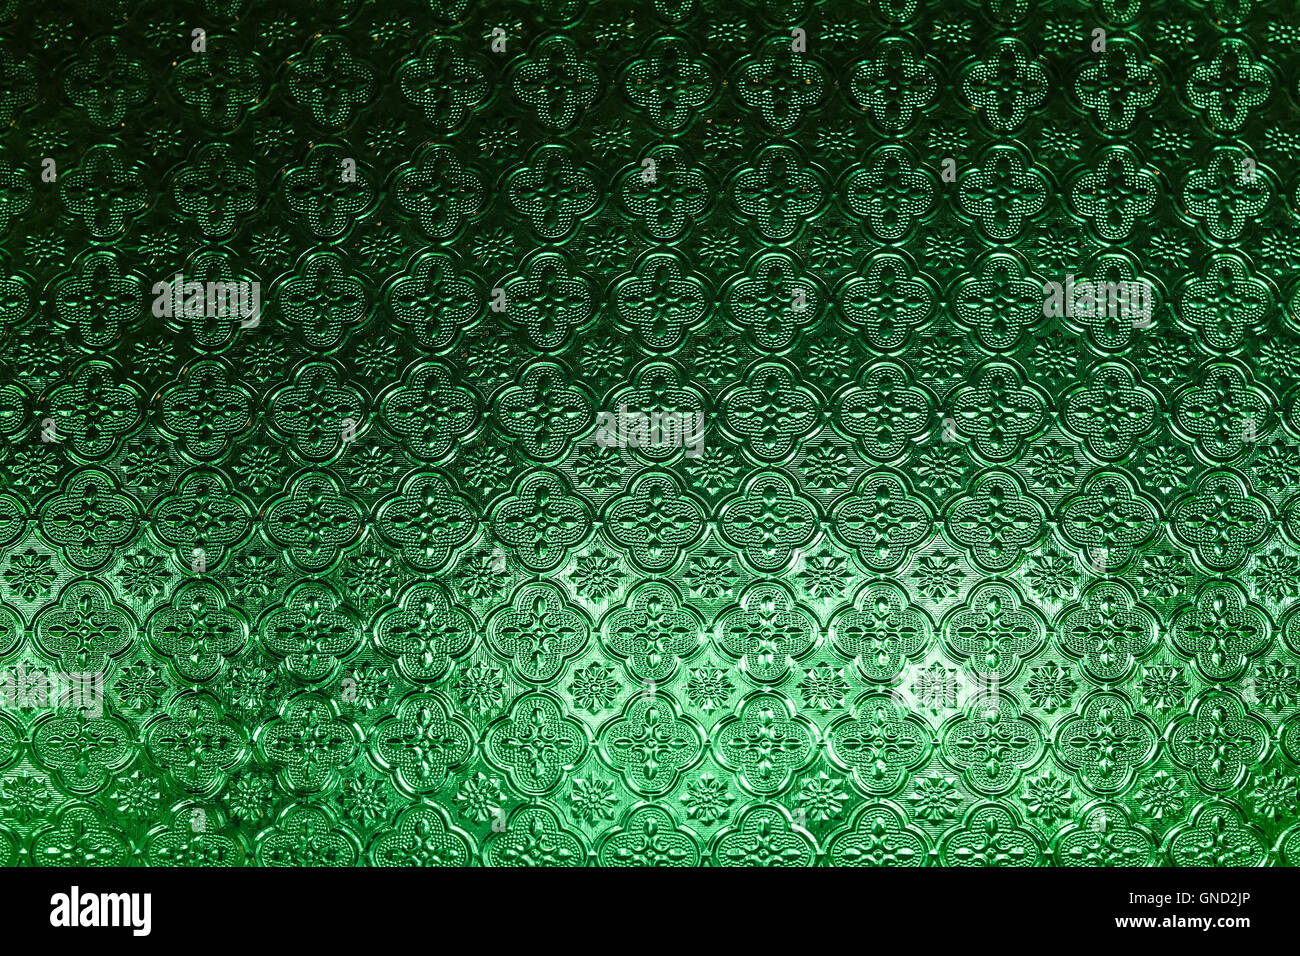 Old style green glass pattern Stock Photo